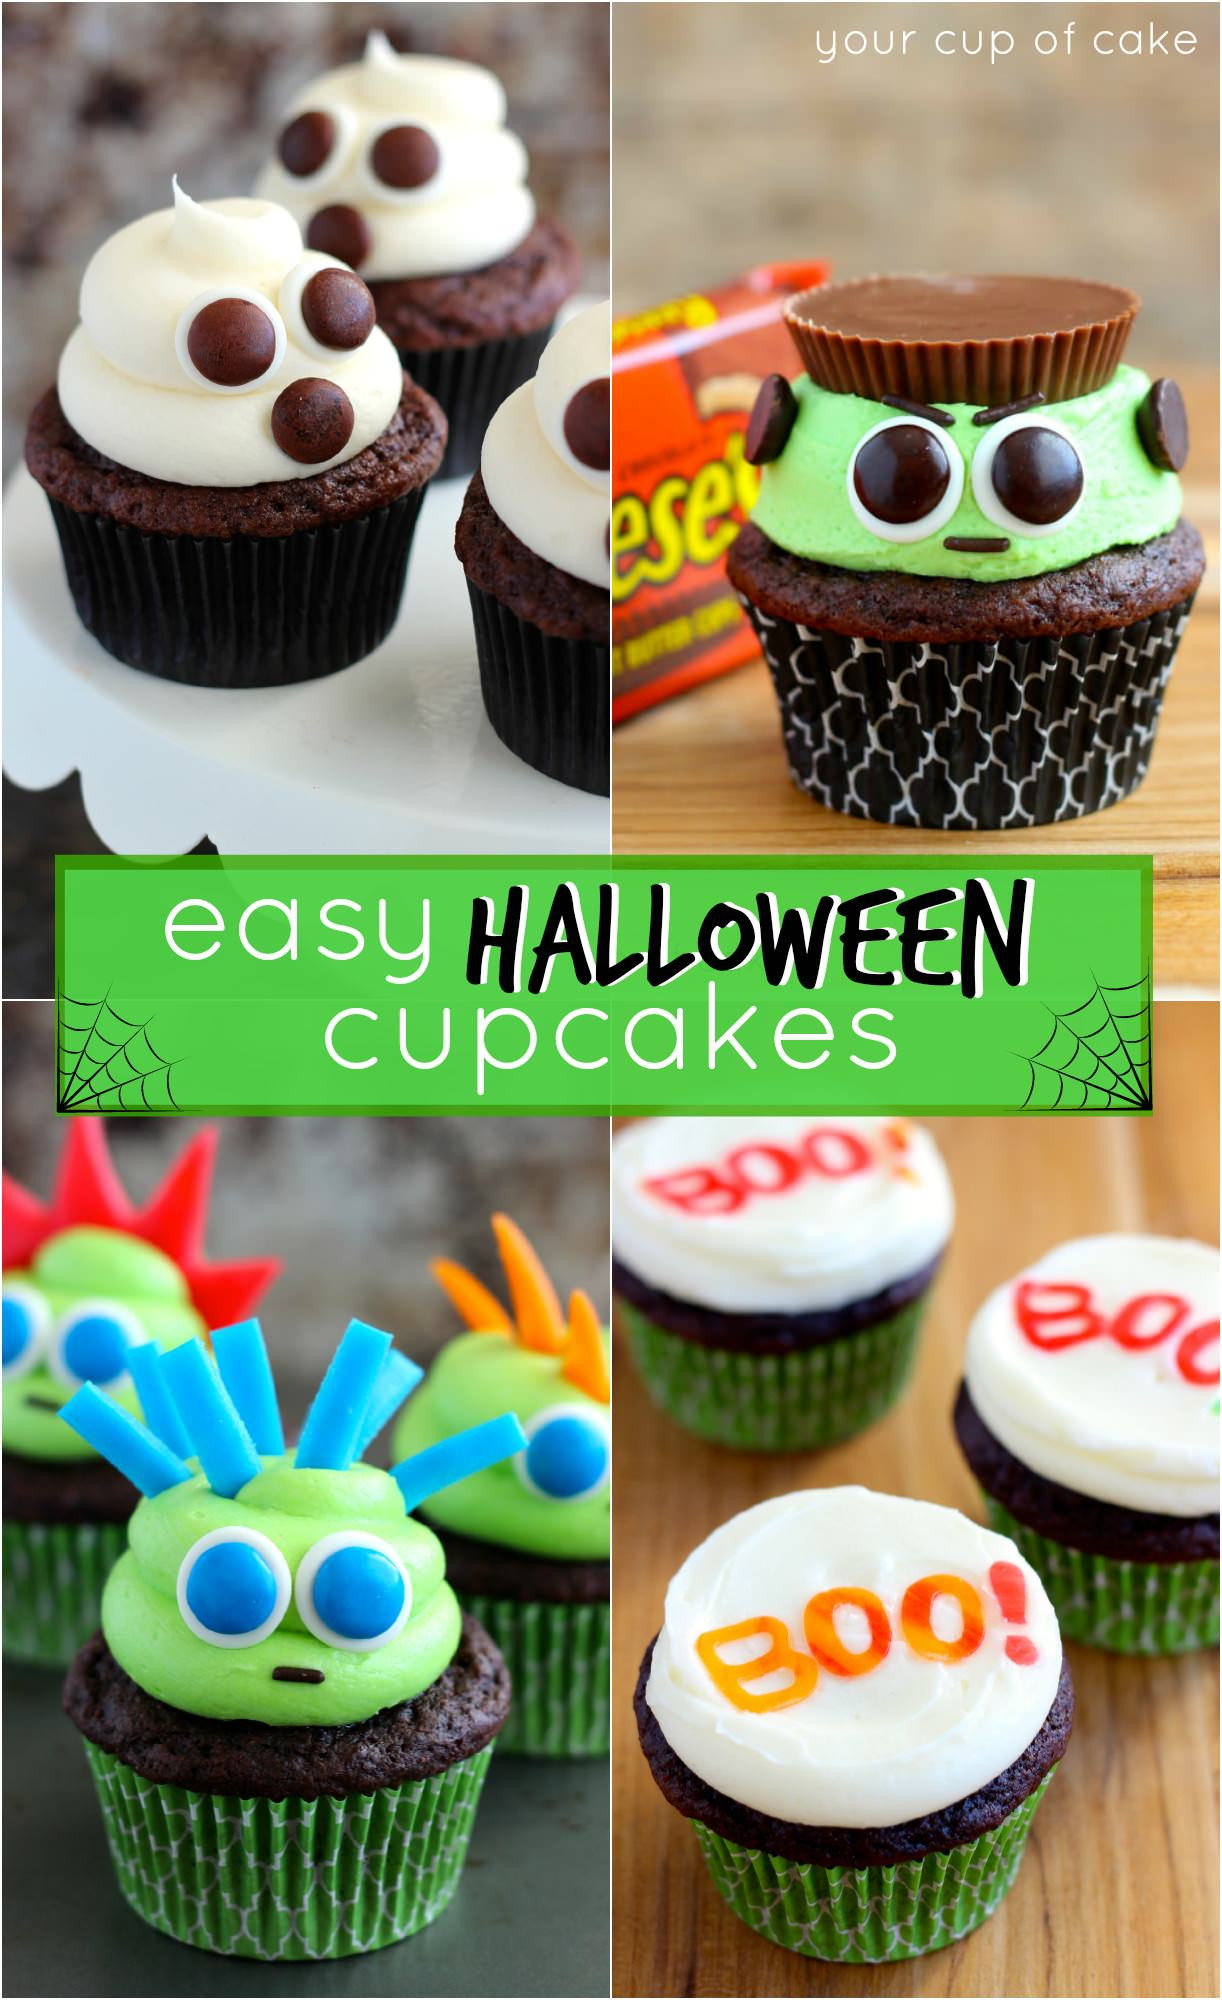 Halloween Cupcakes Decorating Ideas
 Easy Halloween Cupcake Ideas Your Cup of Cake